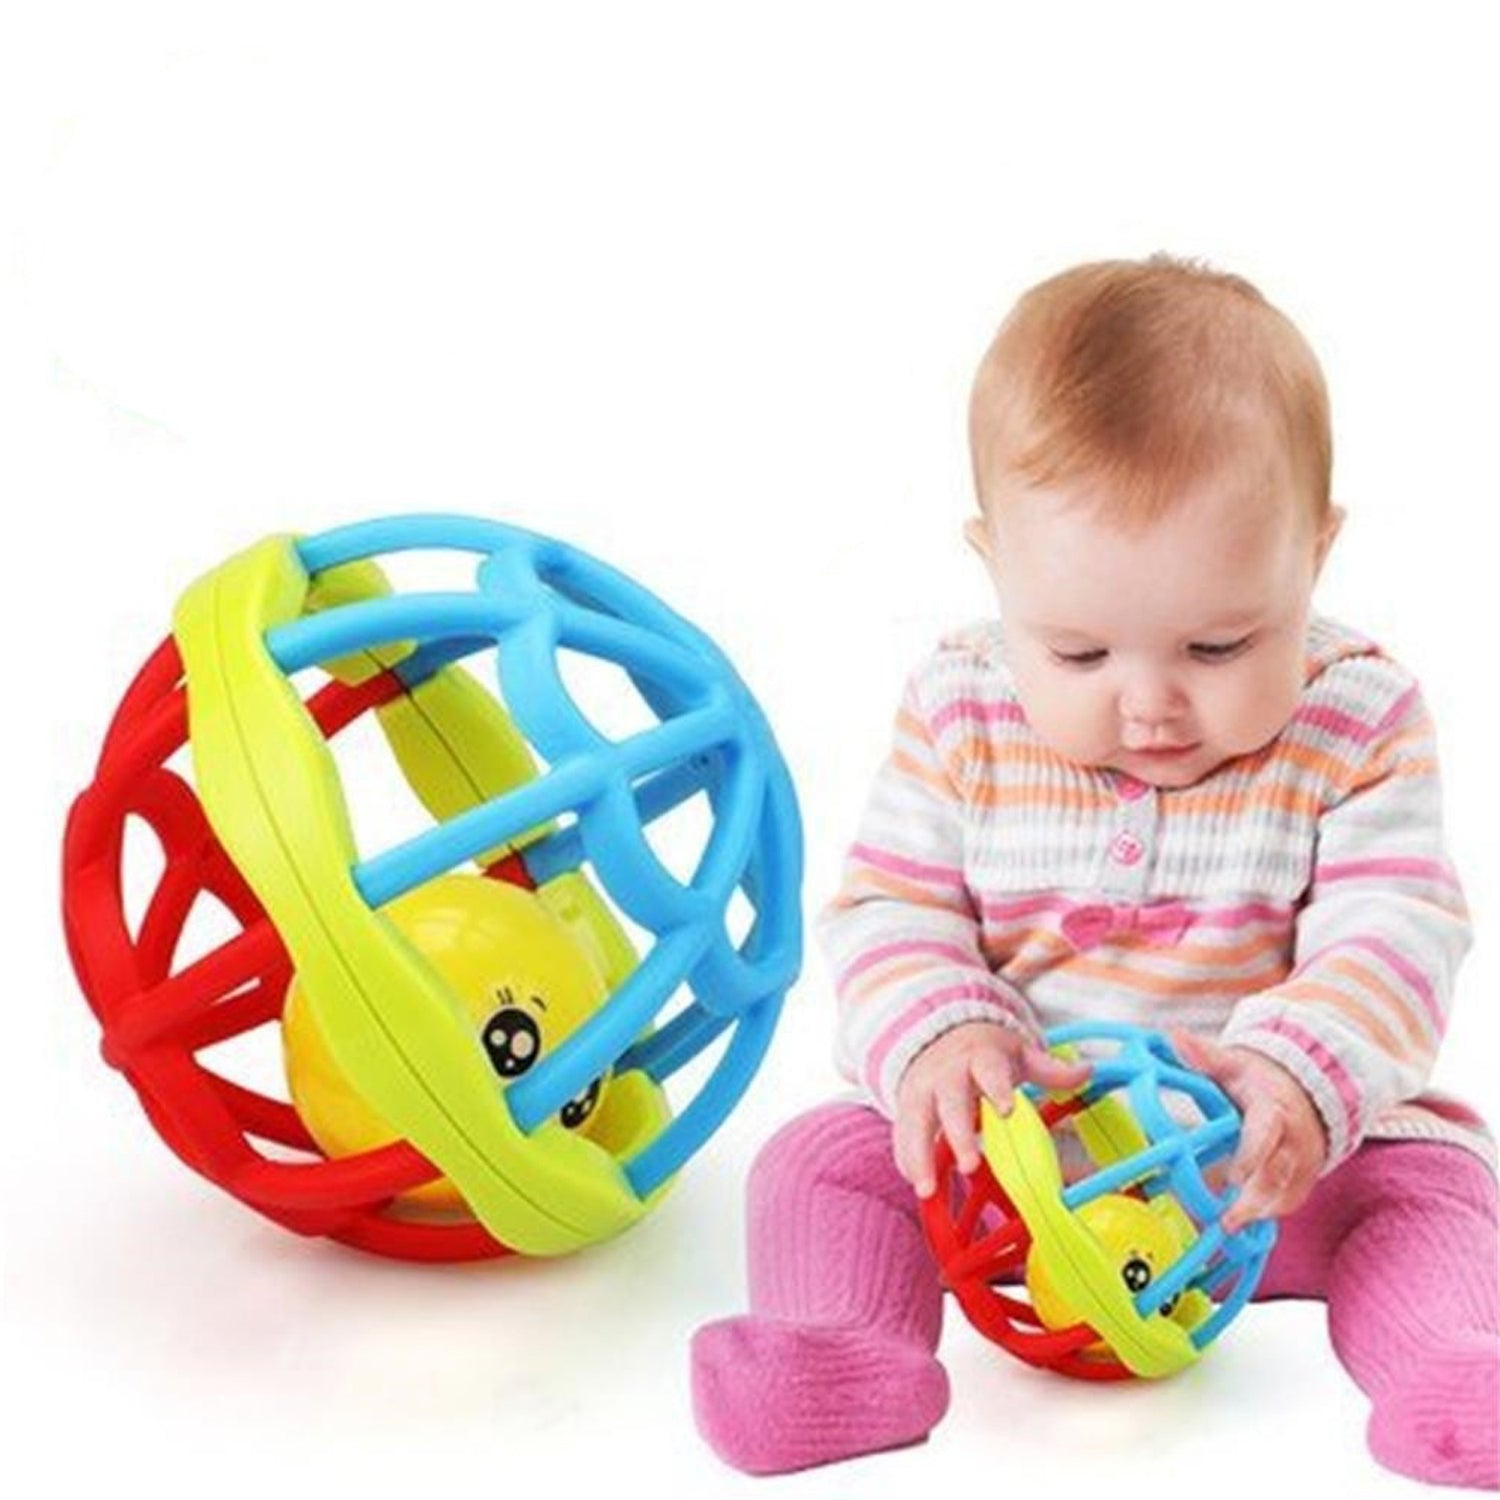 1939 AT39 3Pc Rattles Baby Toy and game for kids and babies for playing and enjoying purposes. DeoDap